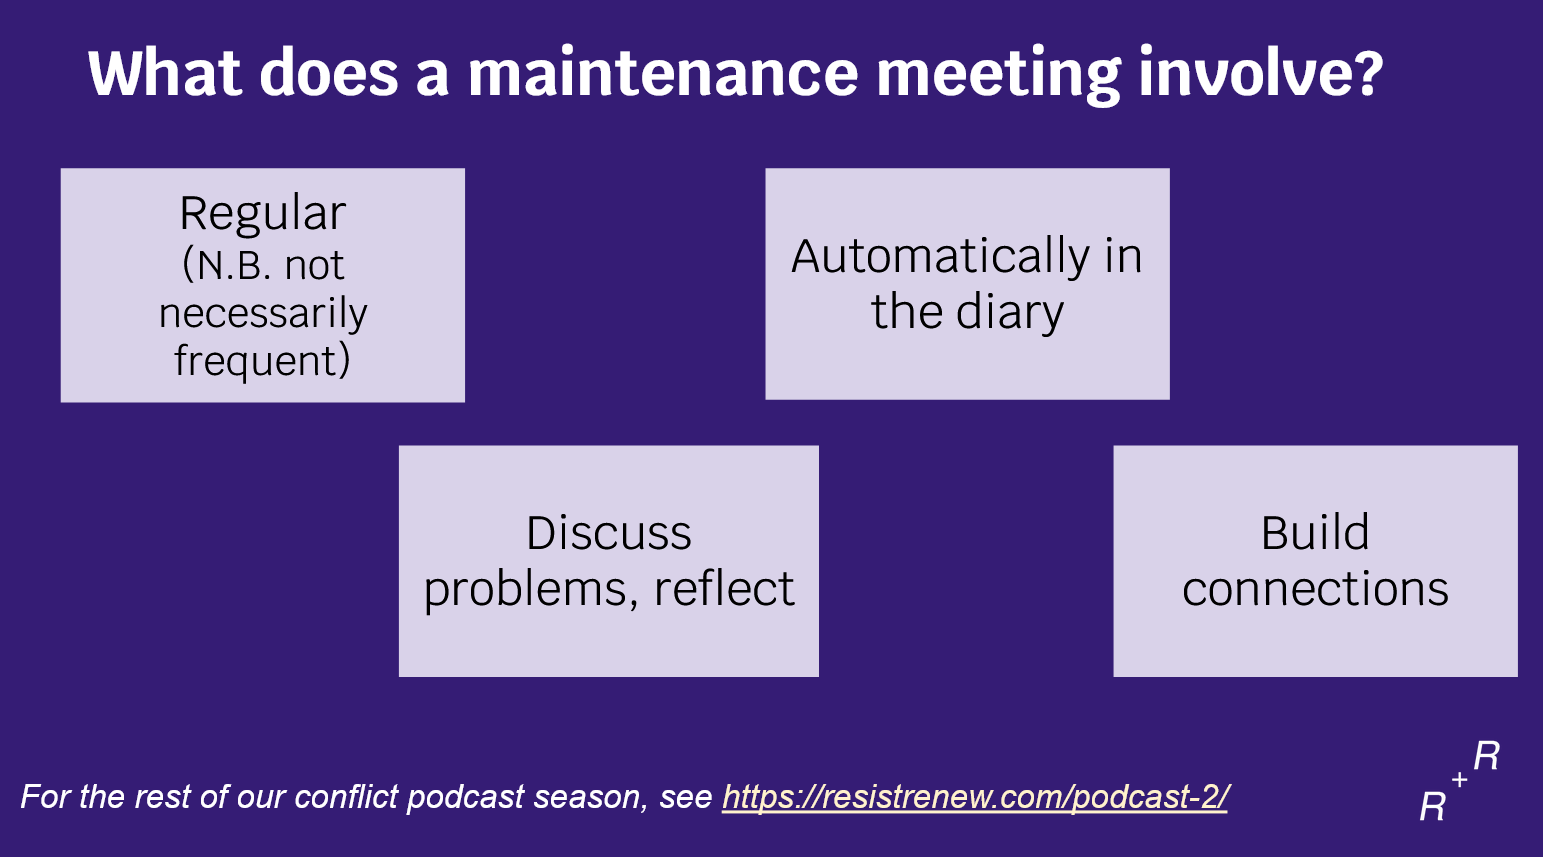 What does a maintenance meeting involve? Regular (N.B. not necessarily frequent); automatically in the diary; discuss, reflect; build connections